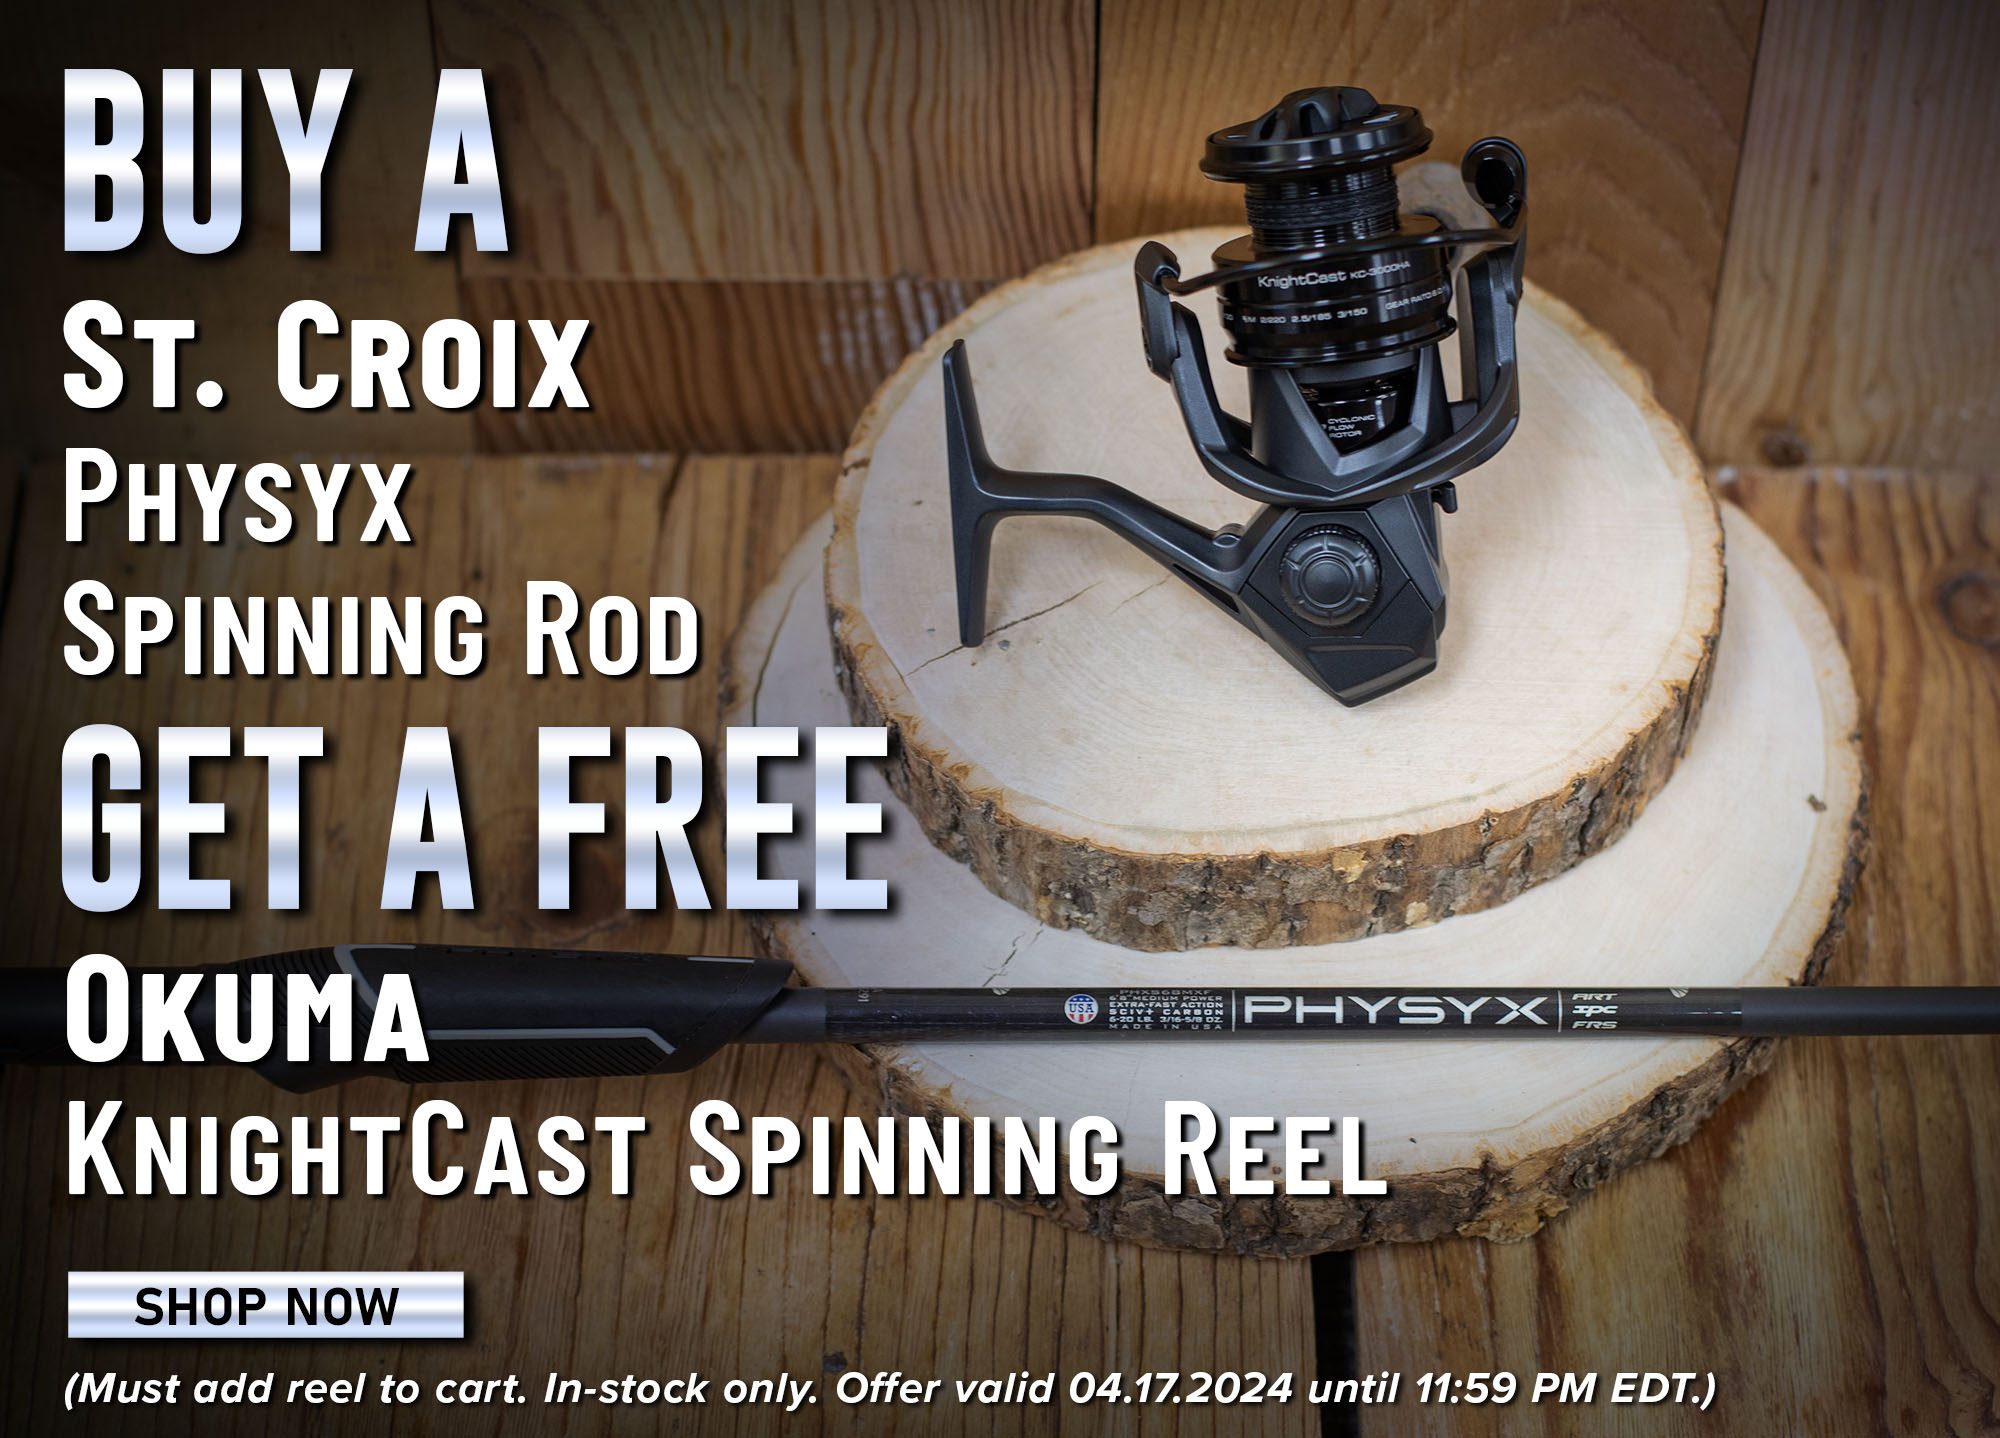 Buy A St. Croix Physyx Spinning Rod Get a Free Okuma KnightCast Spinning Reel Shop Now (Must add reel to cart. In-stock only. Offer valid 04.17.2024 until 11:59 PM EDT.)